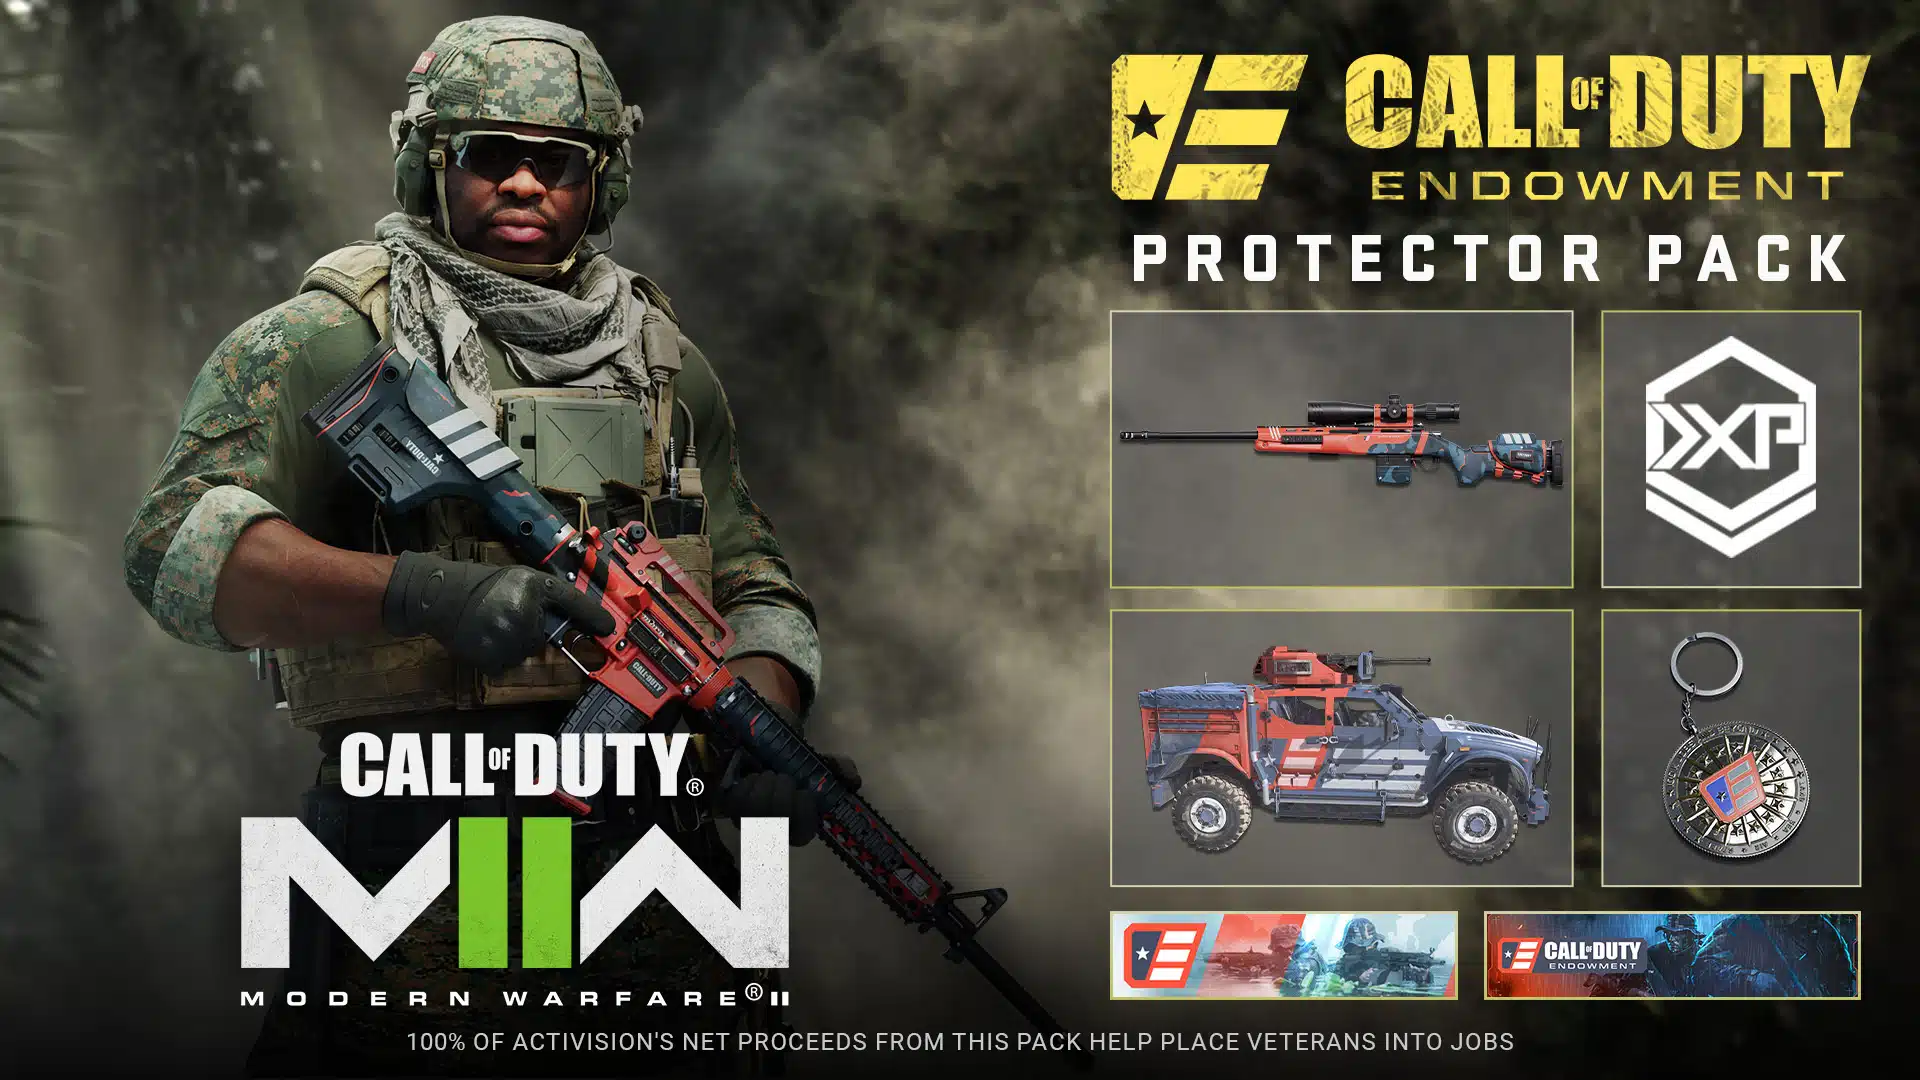 call of duty endowment protector pack